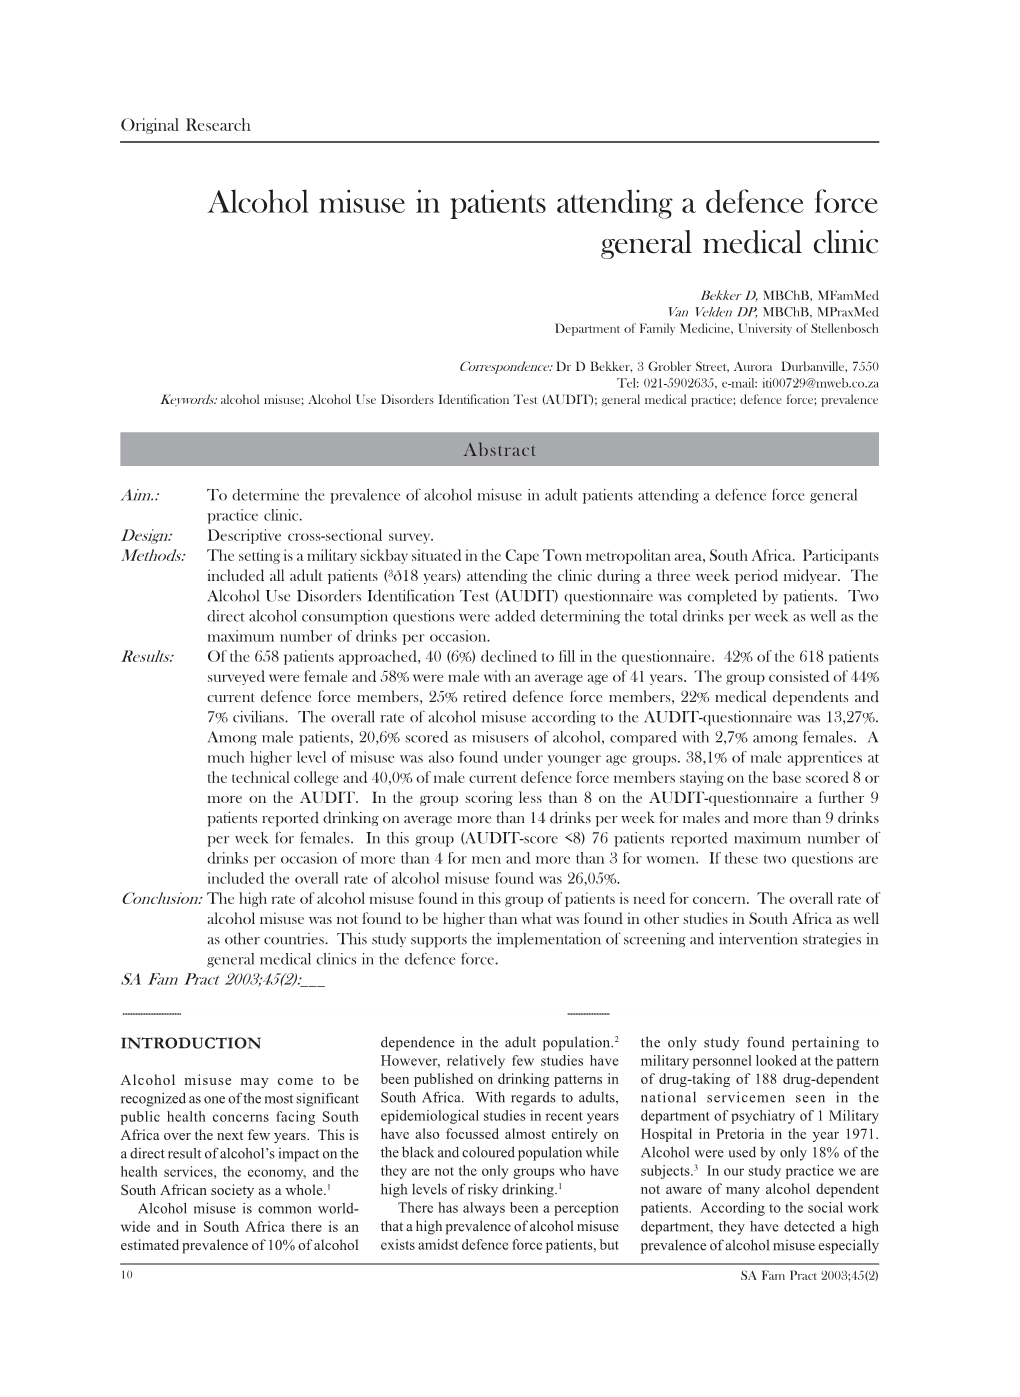 Alcohol Misuse in Patients Attending a Defence Force General Medical Clinic